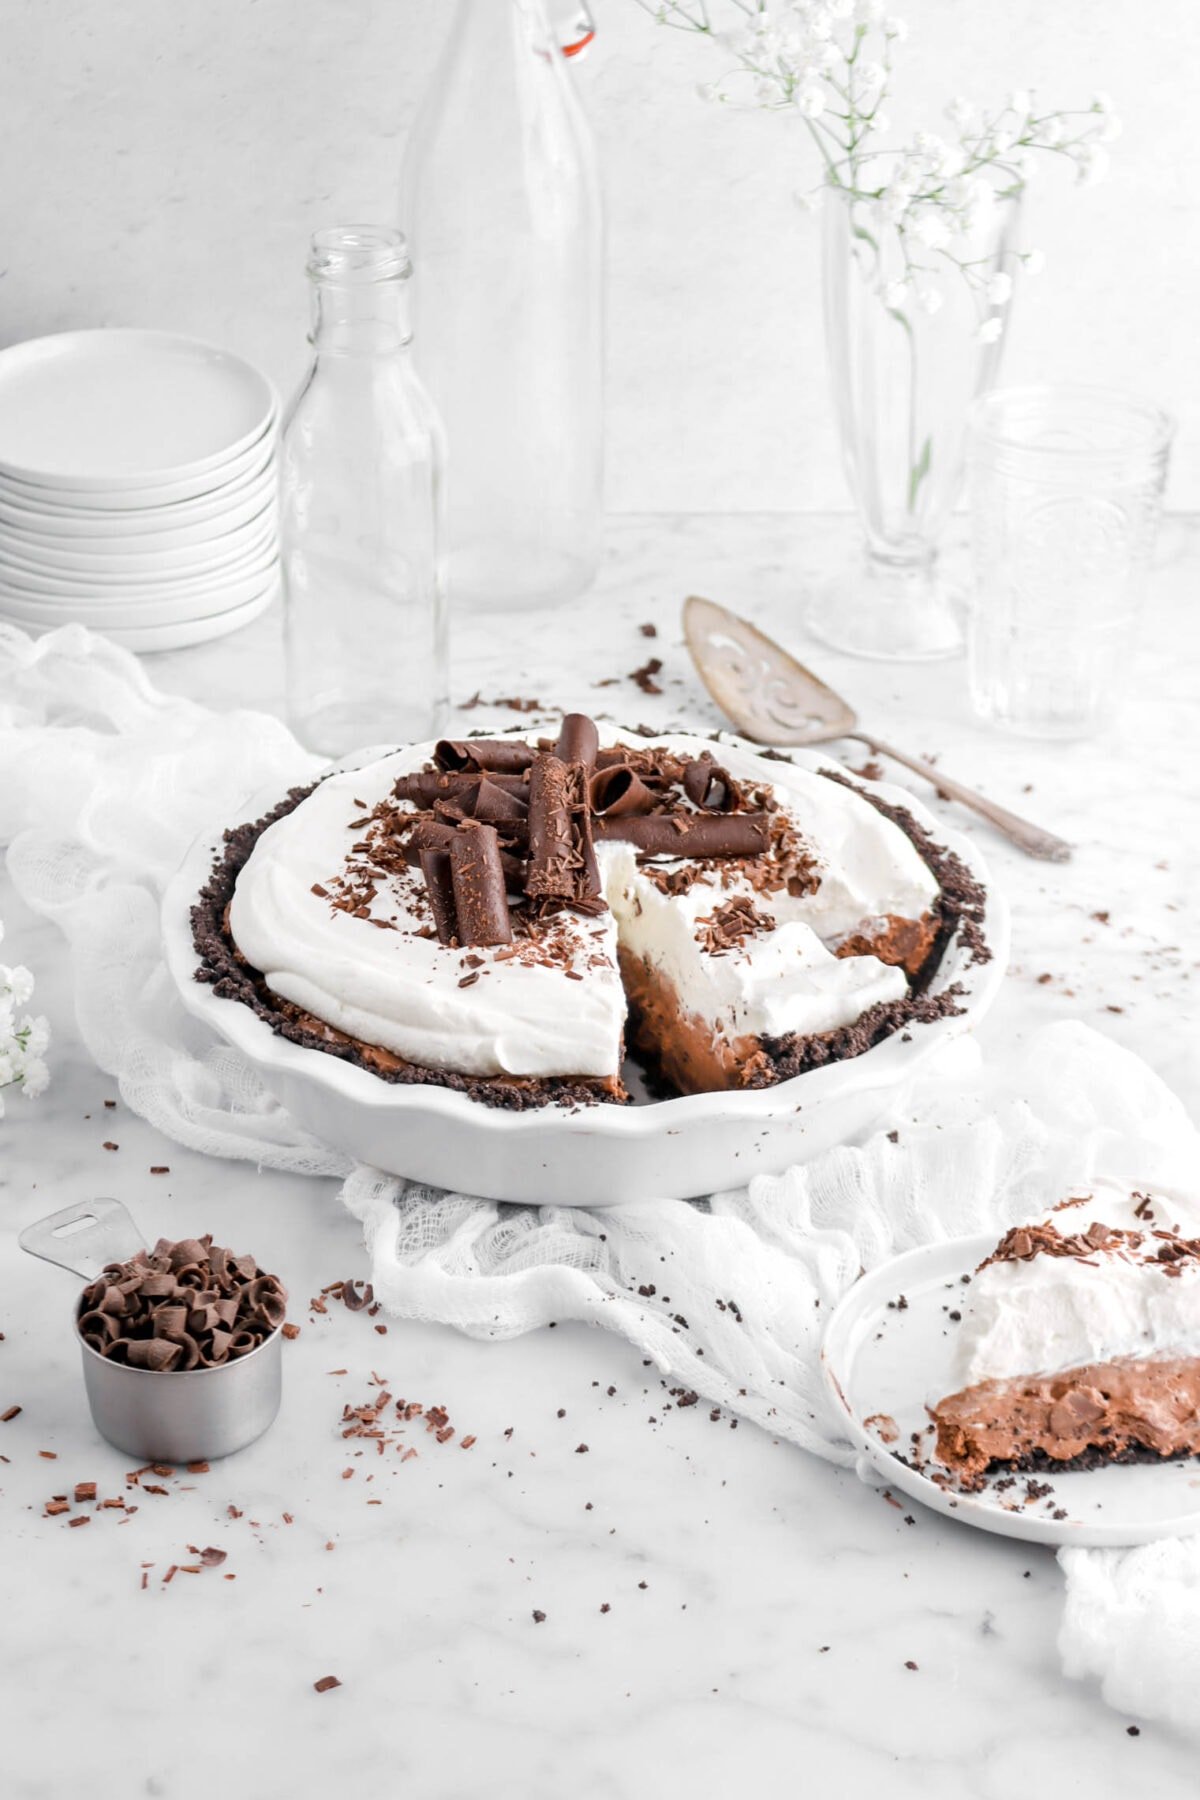 chocolate mousse pie on white cheese cloth with whipped cream and large chocolate curls on top, with slice on white plate in front, a measuring cup of chocolate curls, stack of plates beside, and empty glasses